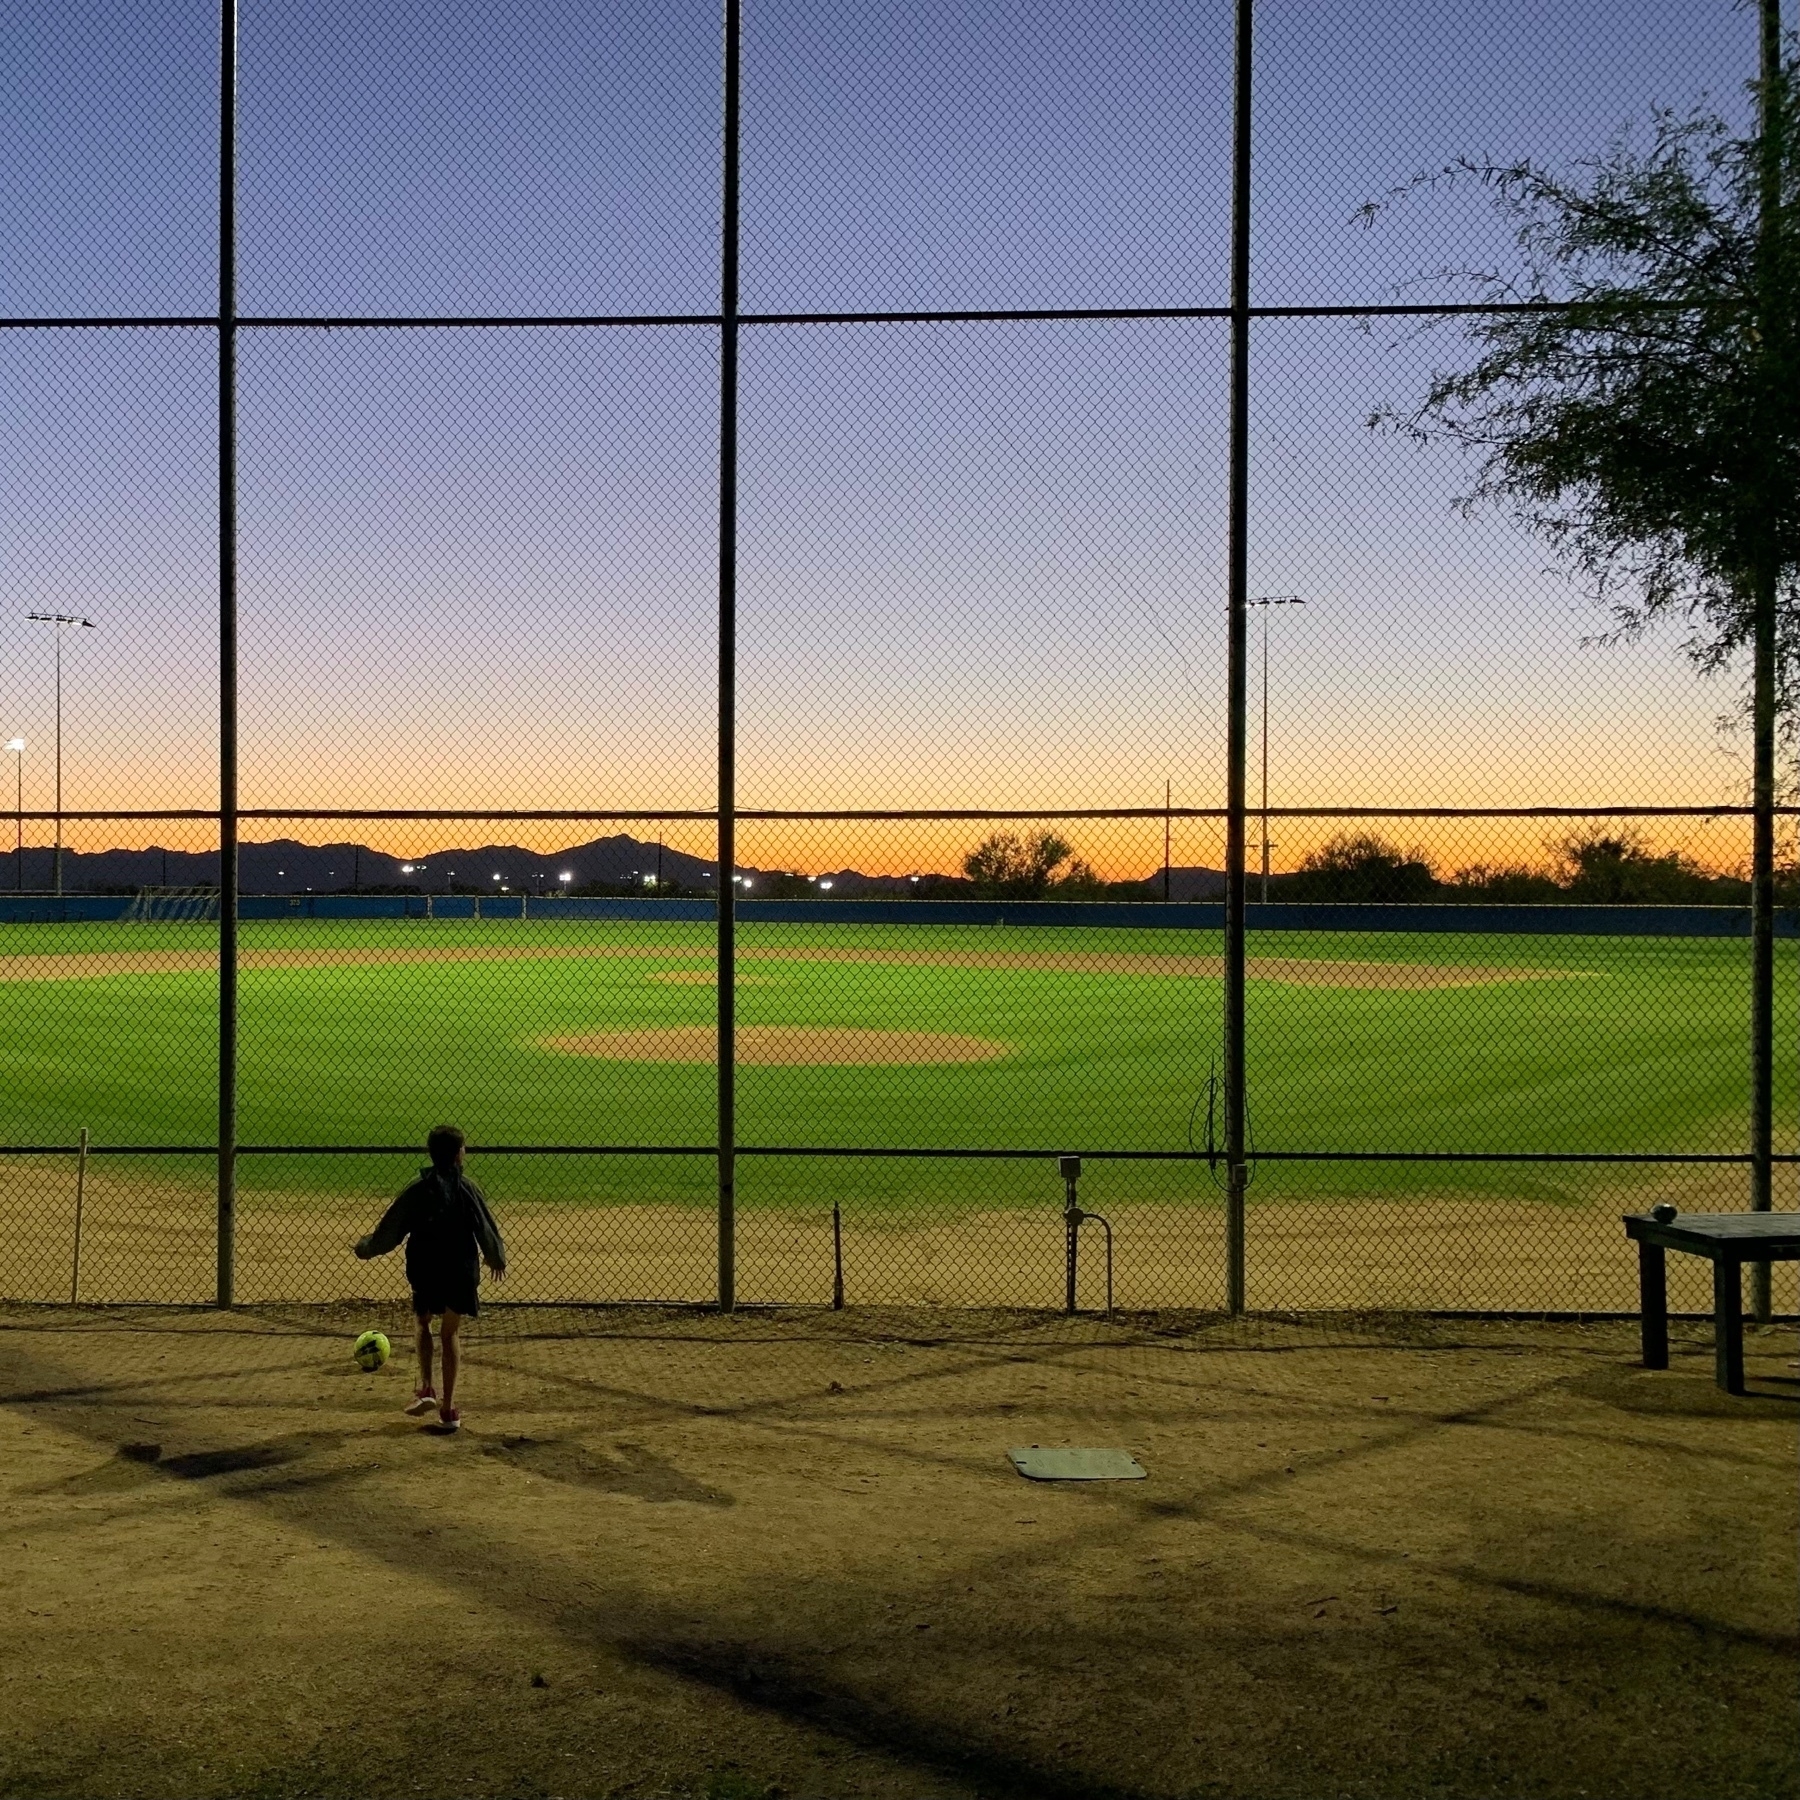 child with ball outside a baseball field at sunset